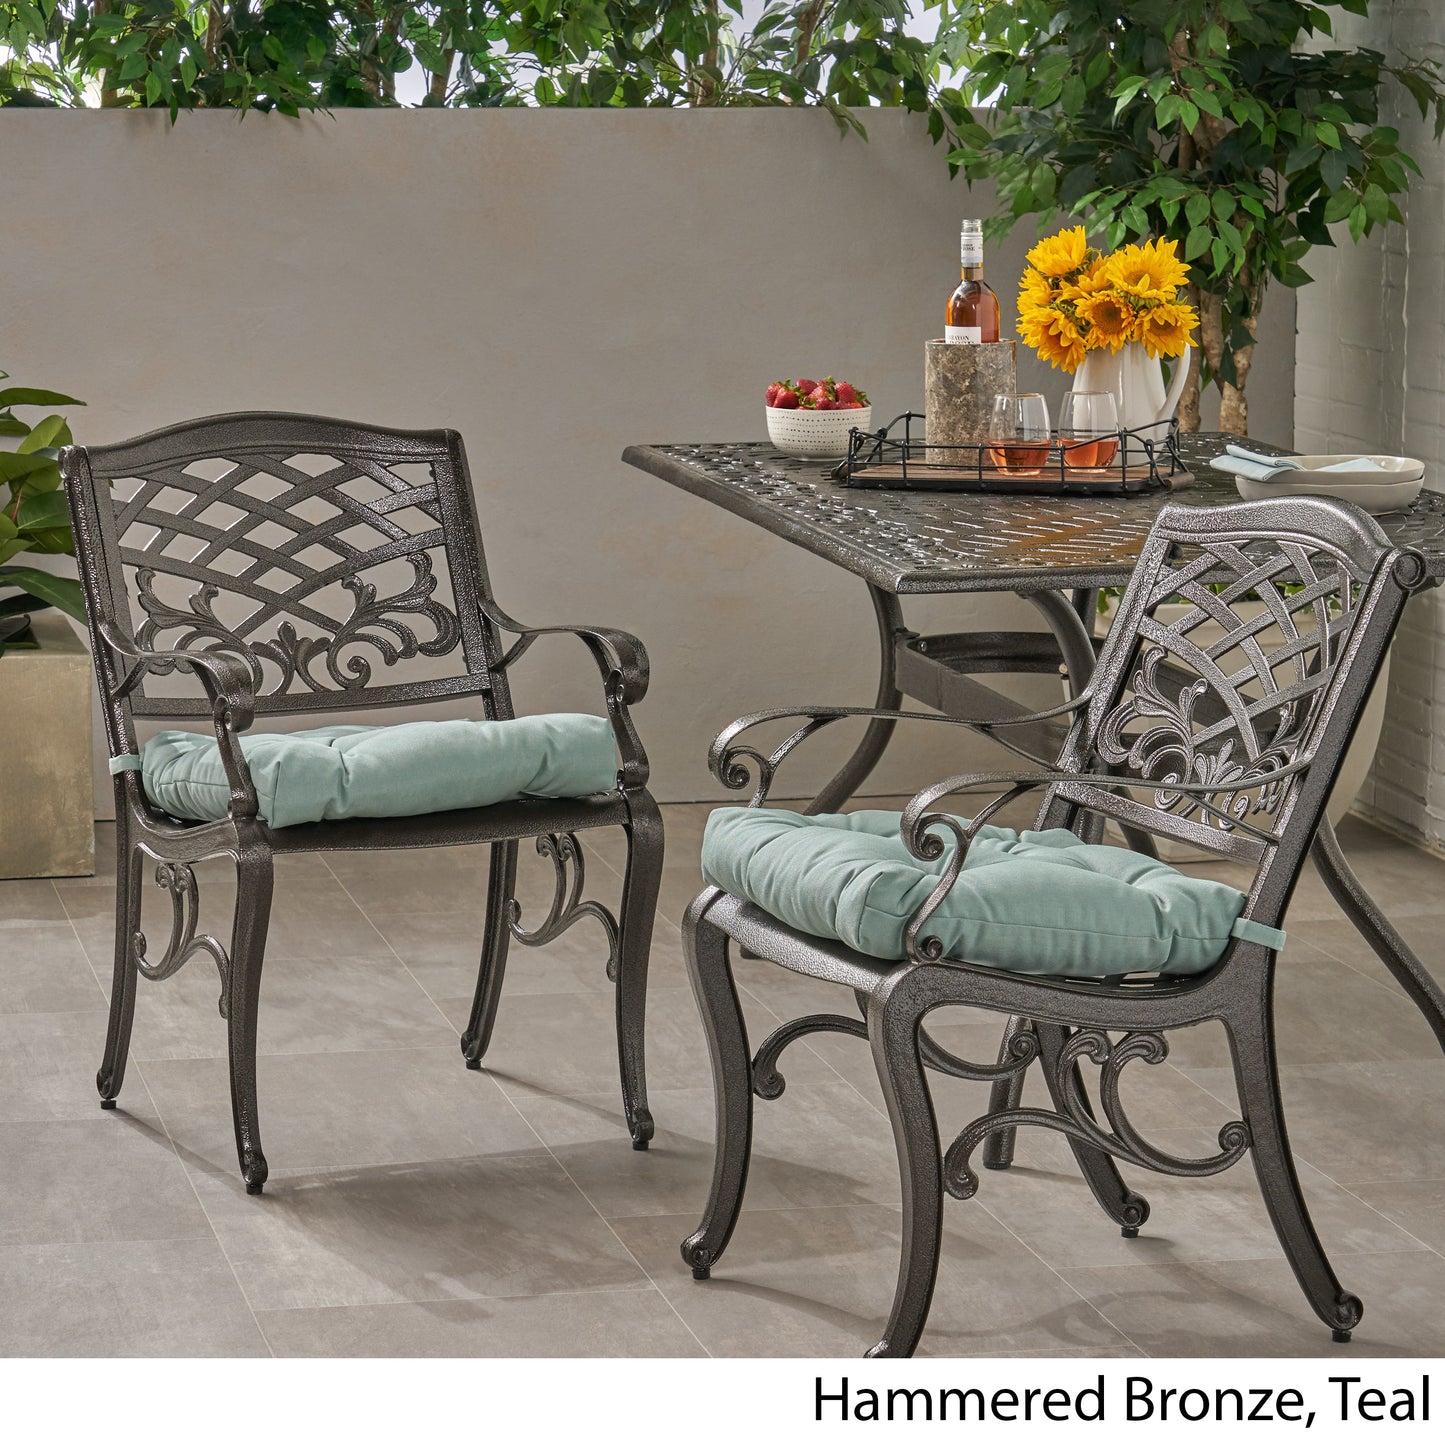 Juel Outdoor Dining Chair with Cushion (Set of 2)